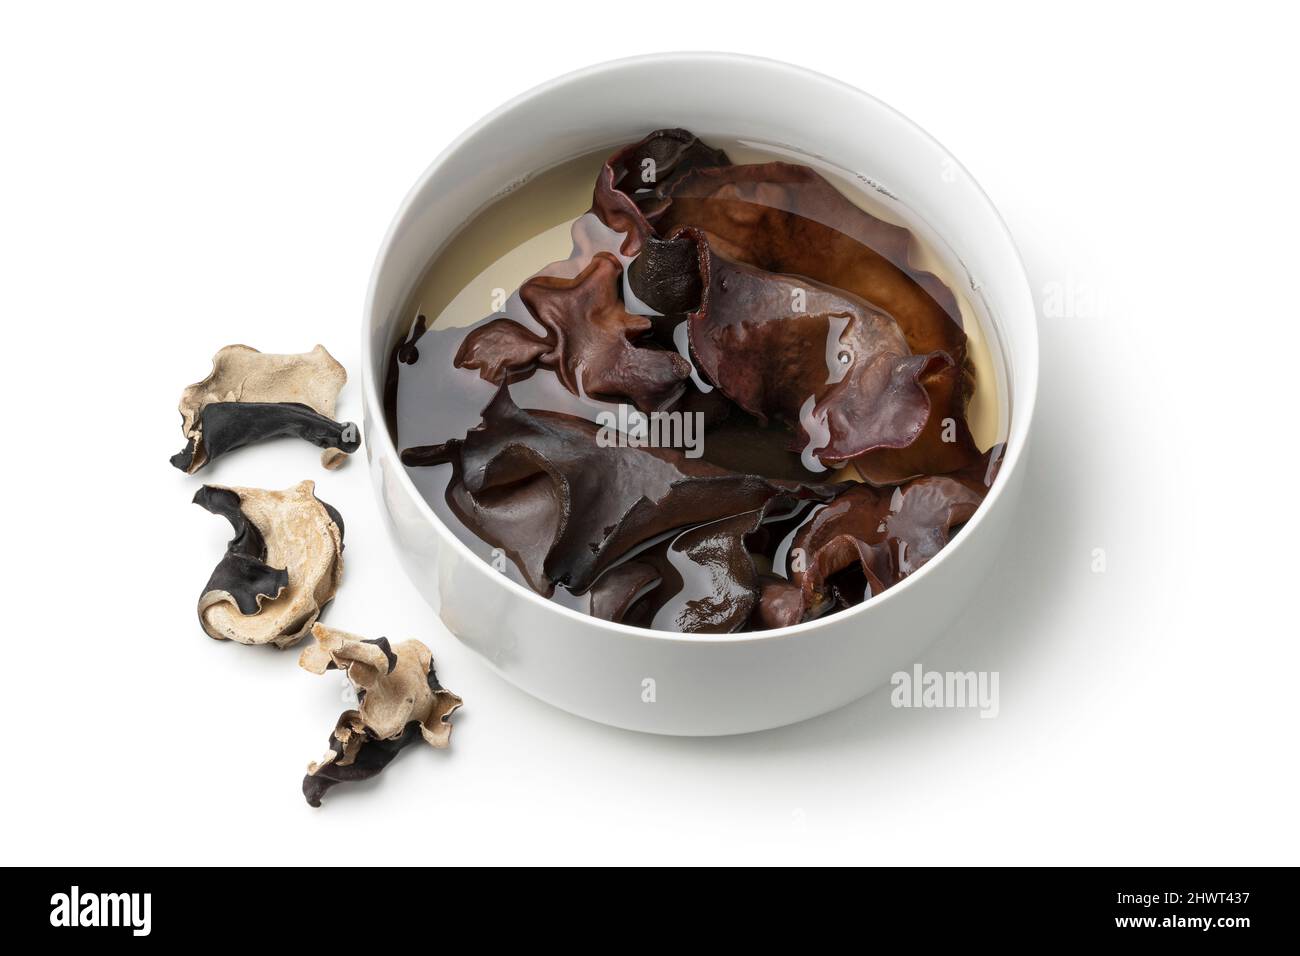 Dried jews ear mushrooms soaking in water in a bowl close up isolated on white background Stock Photo